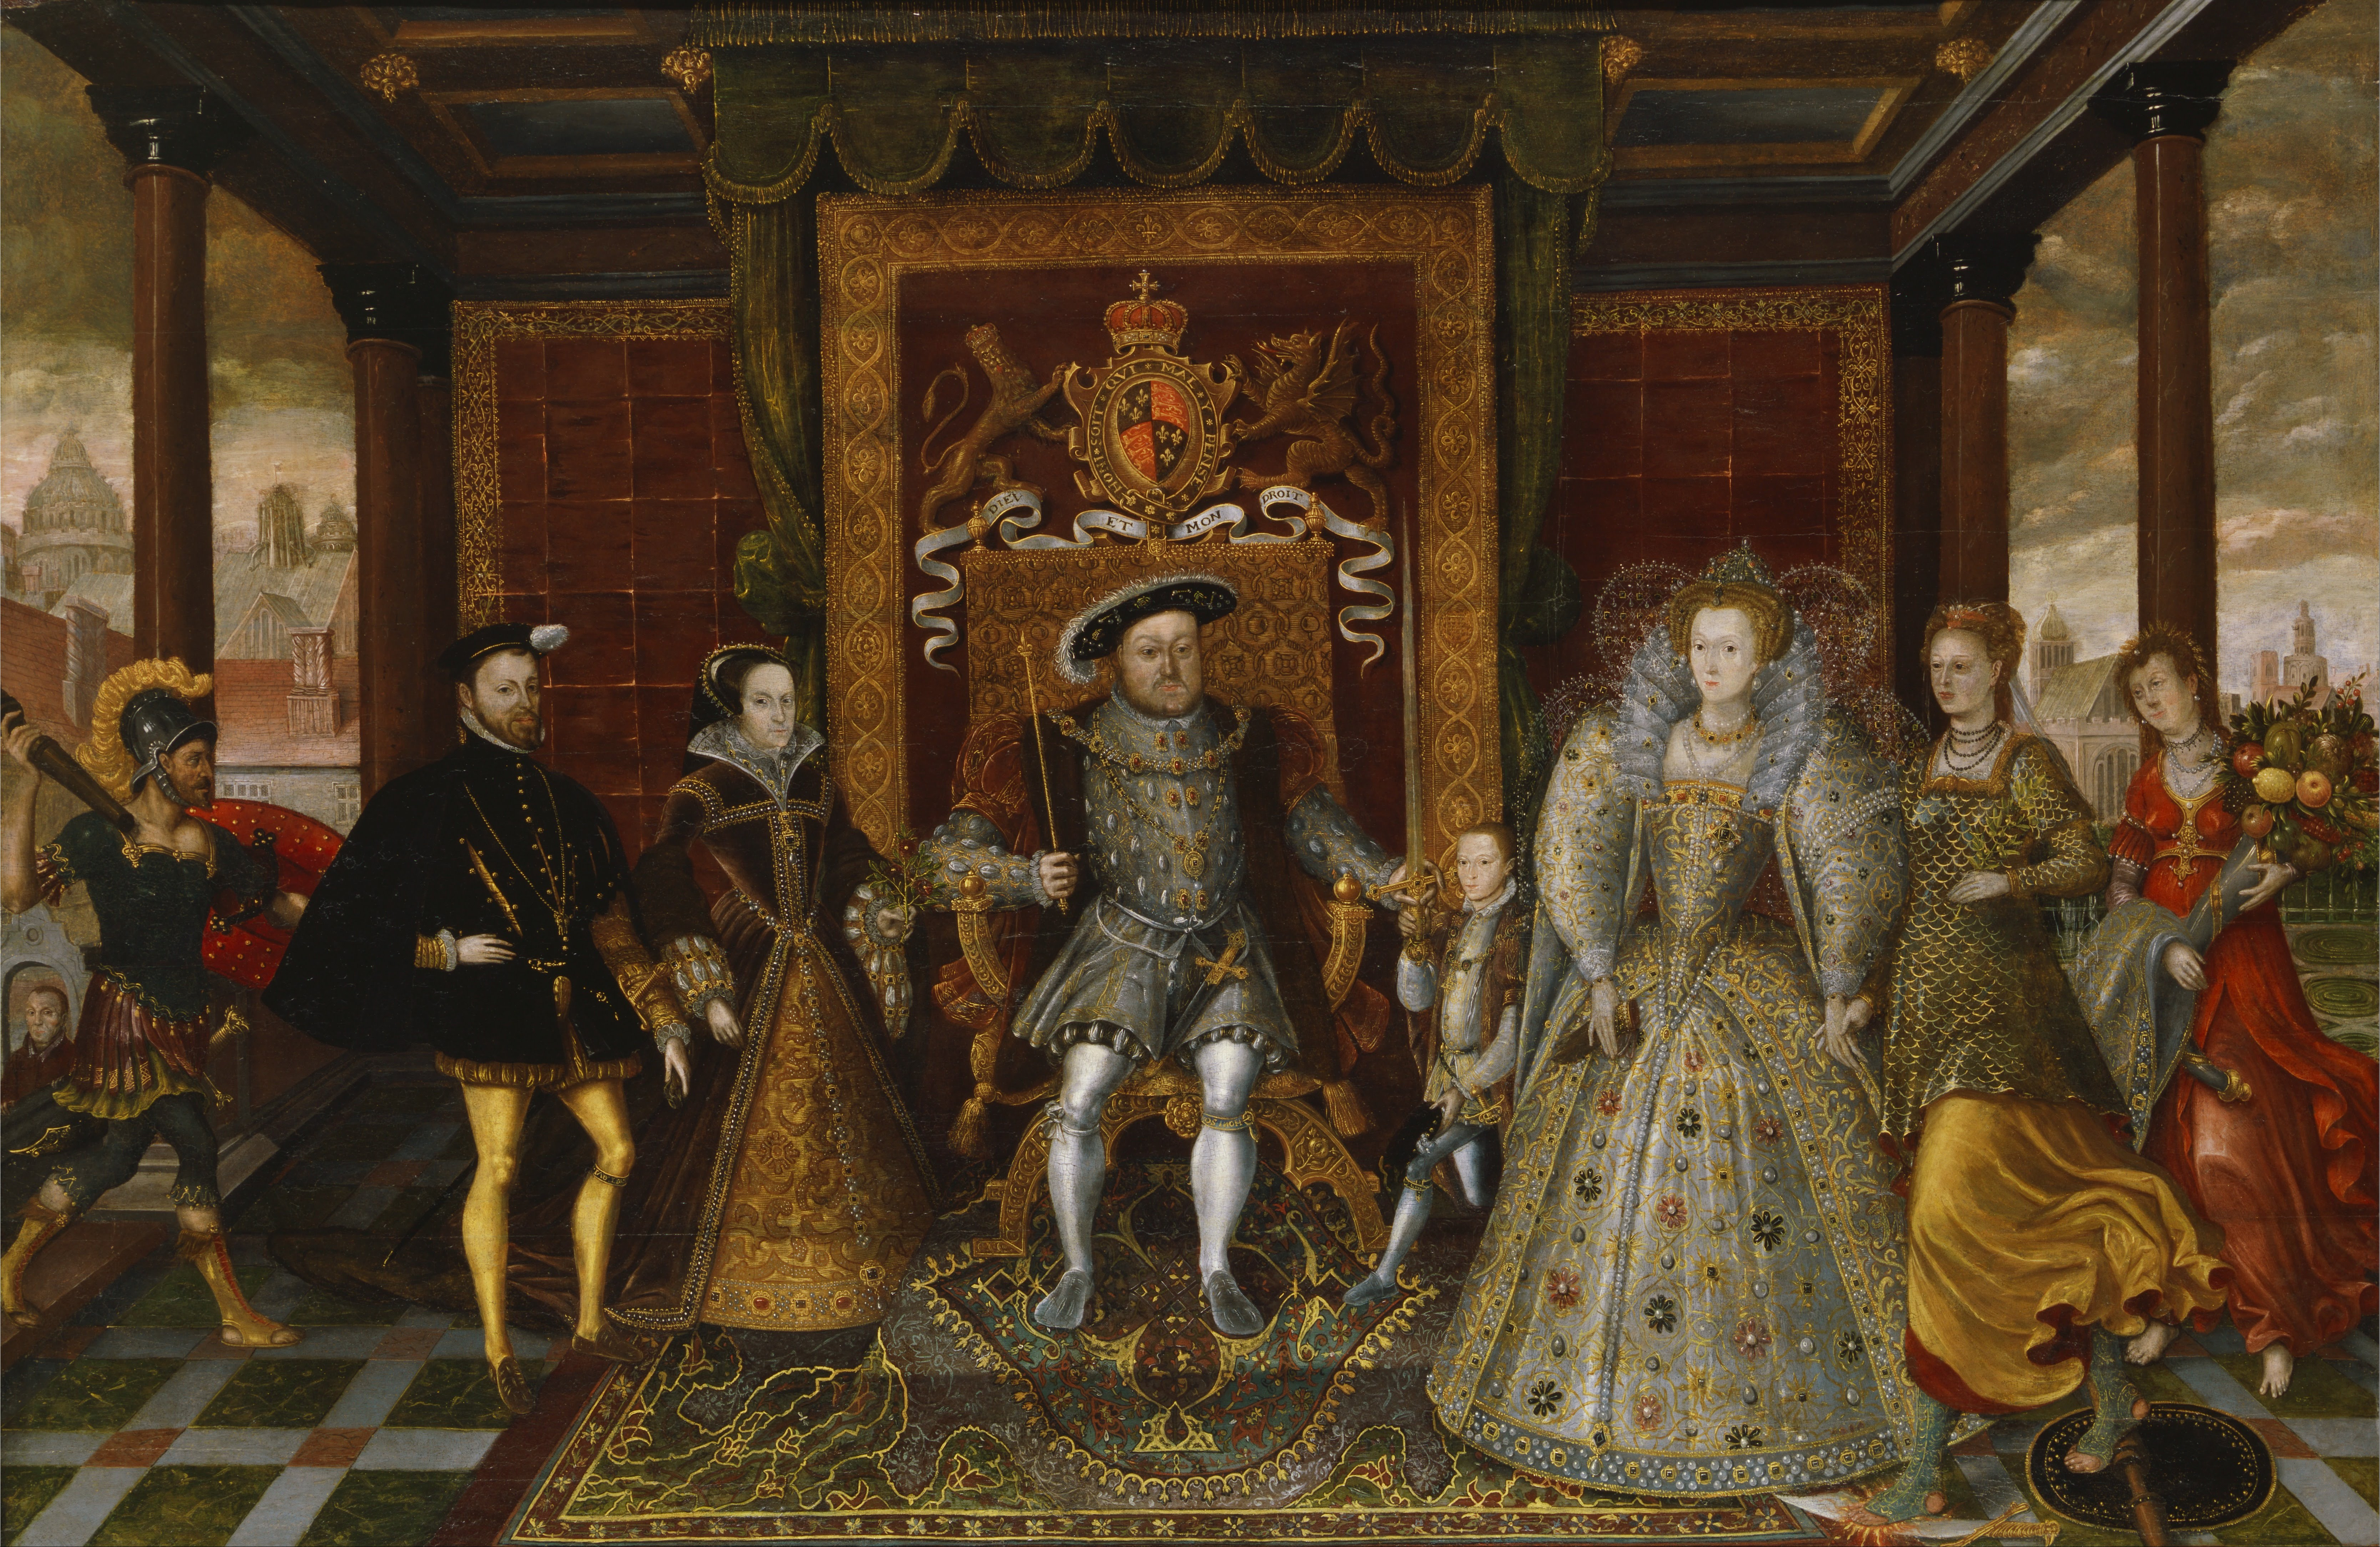 If you weren’t part of the nobility, you weren’t allowed to wear crimson or blue. Image: 'An Allegory of the Tudor Succession: The Family of Henry VIII' / Yale Center for British Art, Paul Mellon Collection